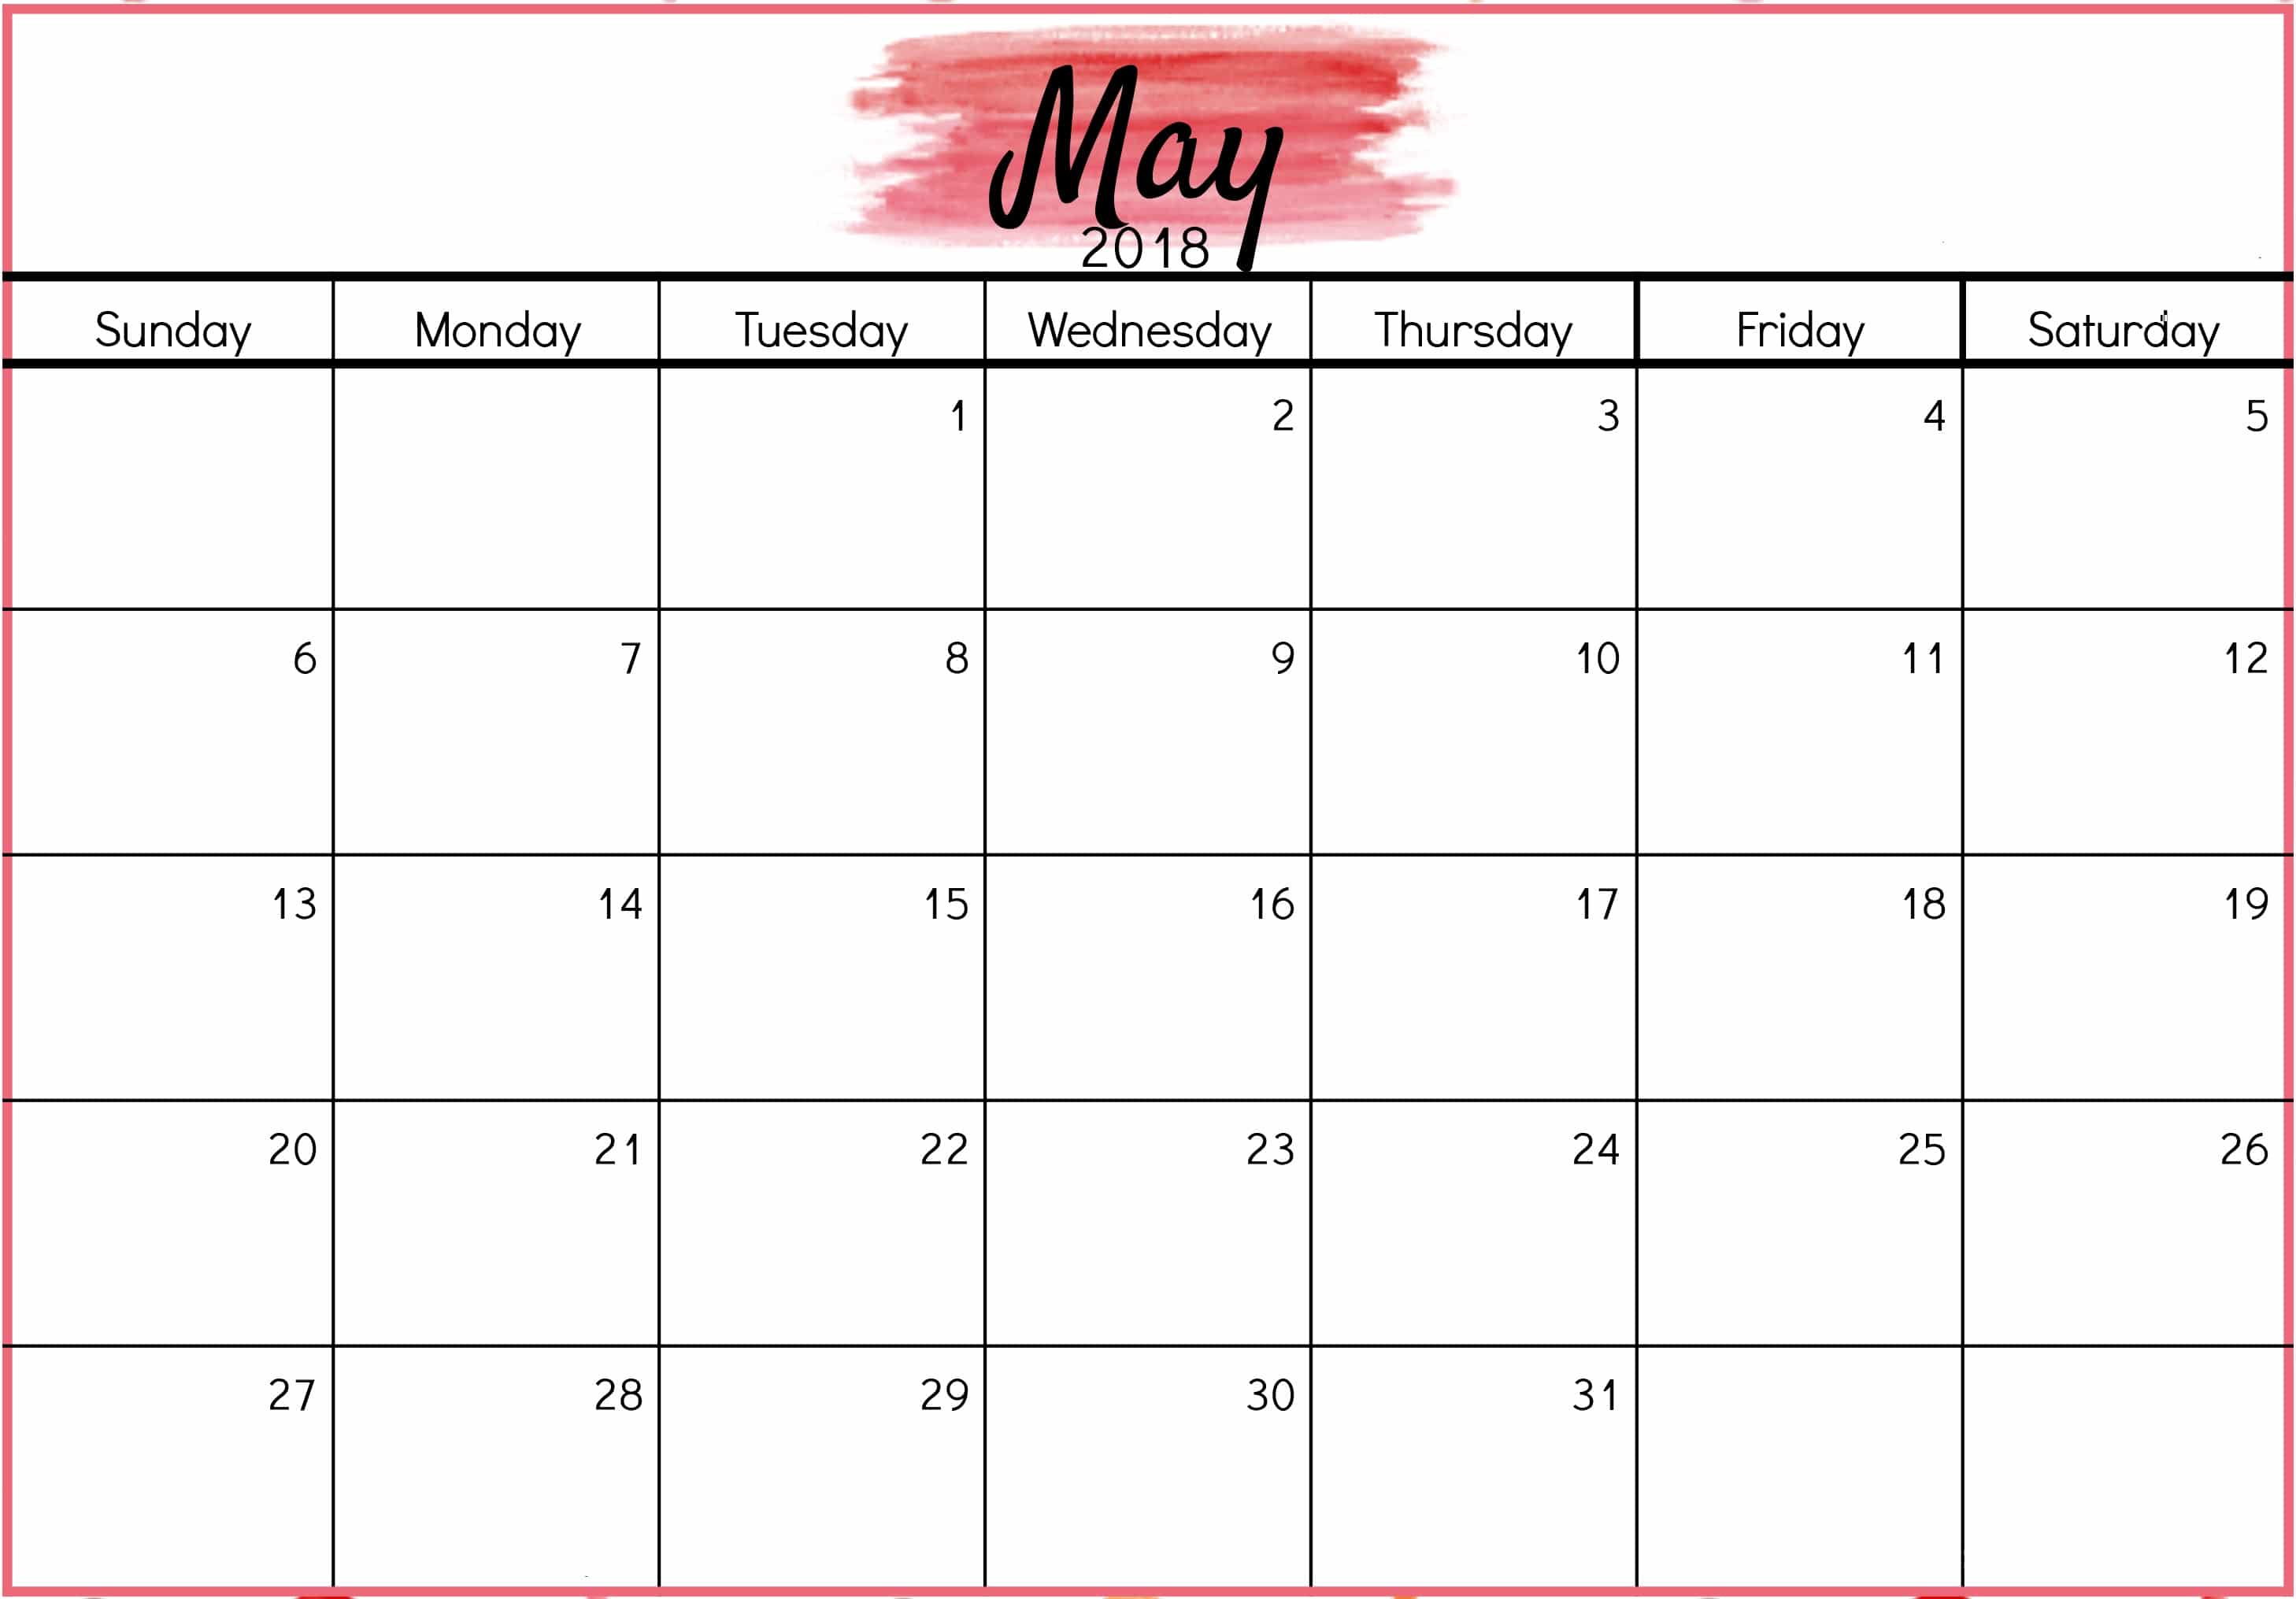 may-2018-monthly-calendar-template-oppidan-library